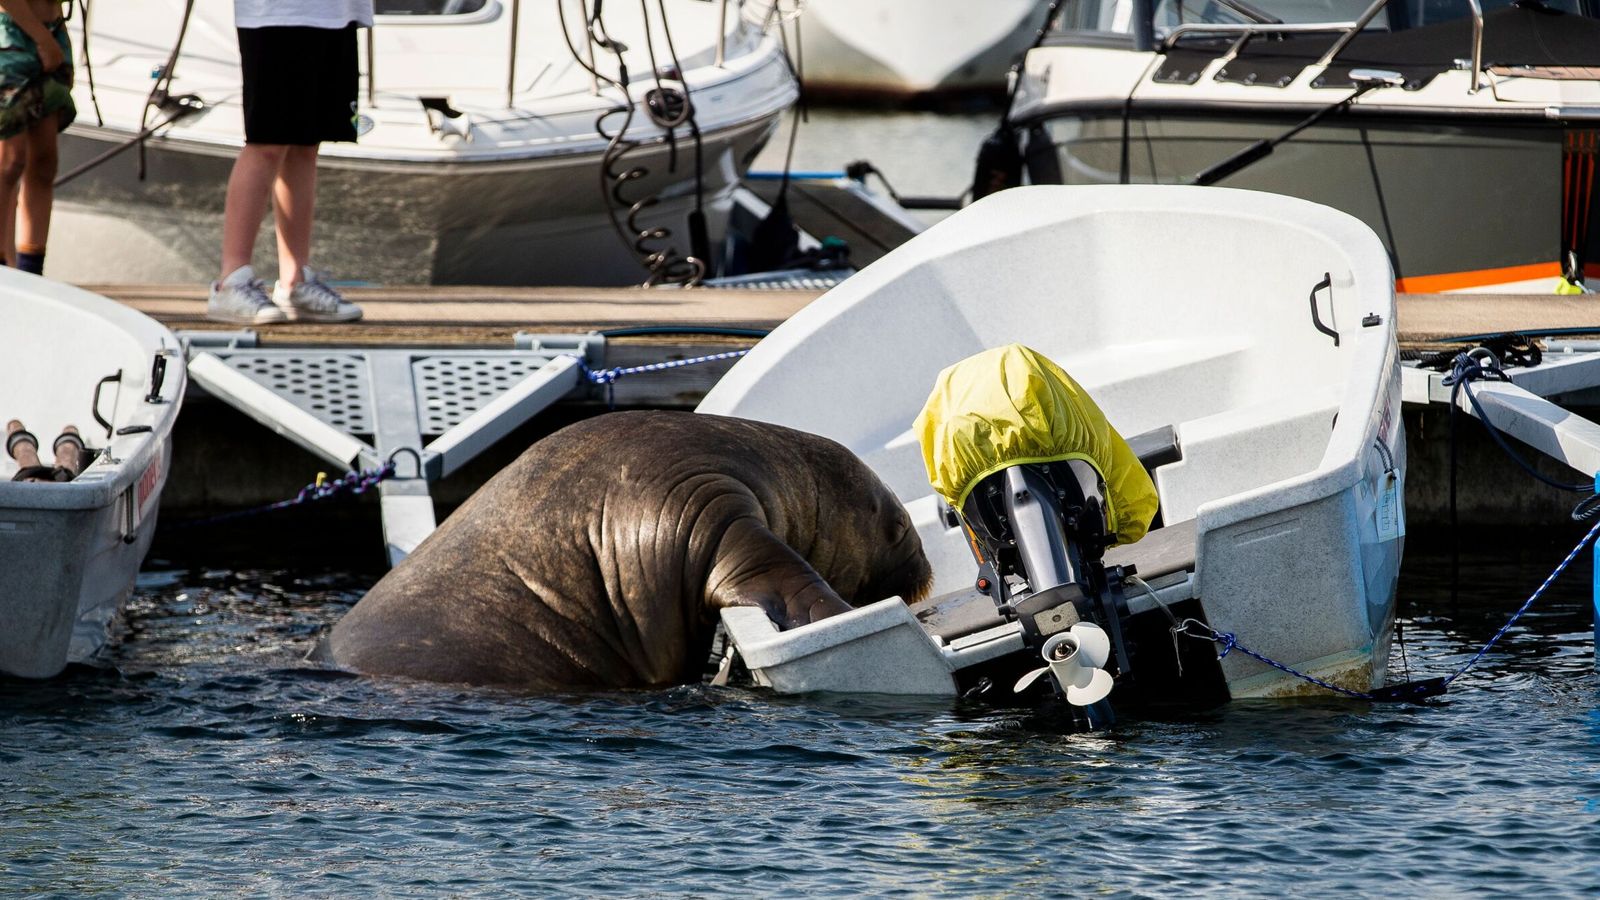 Freya the walrus could be euthanised if public do not keep distance, Norway warns